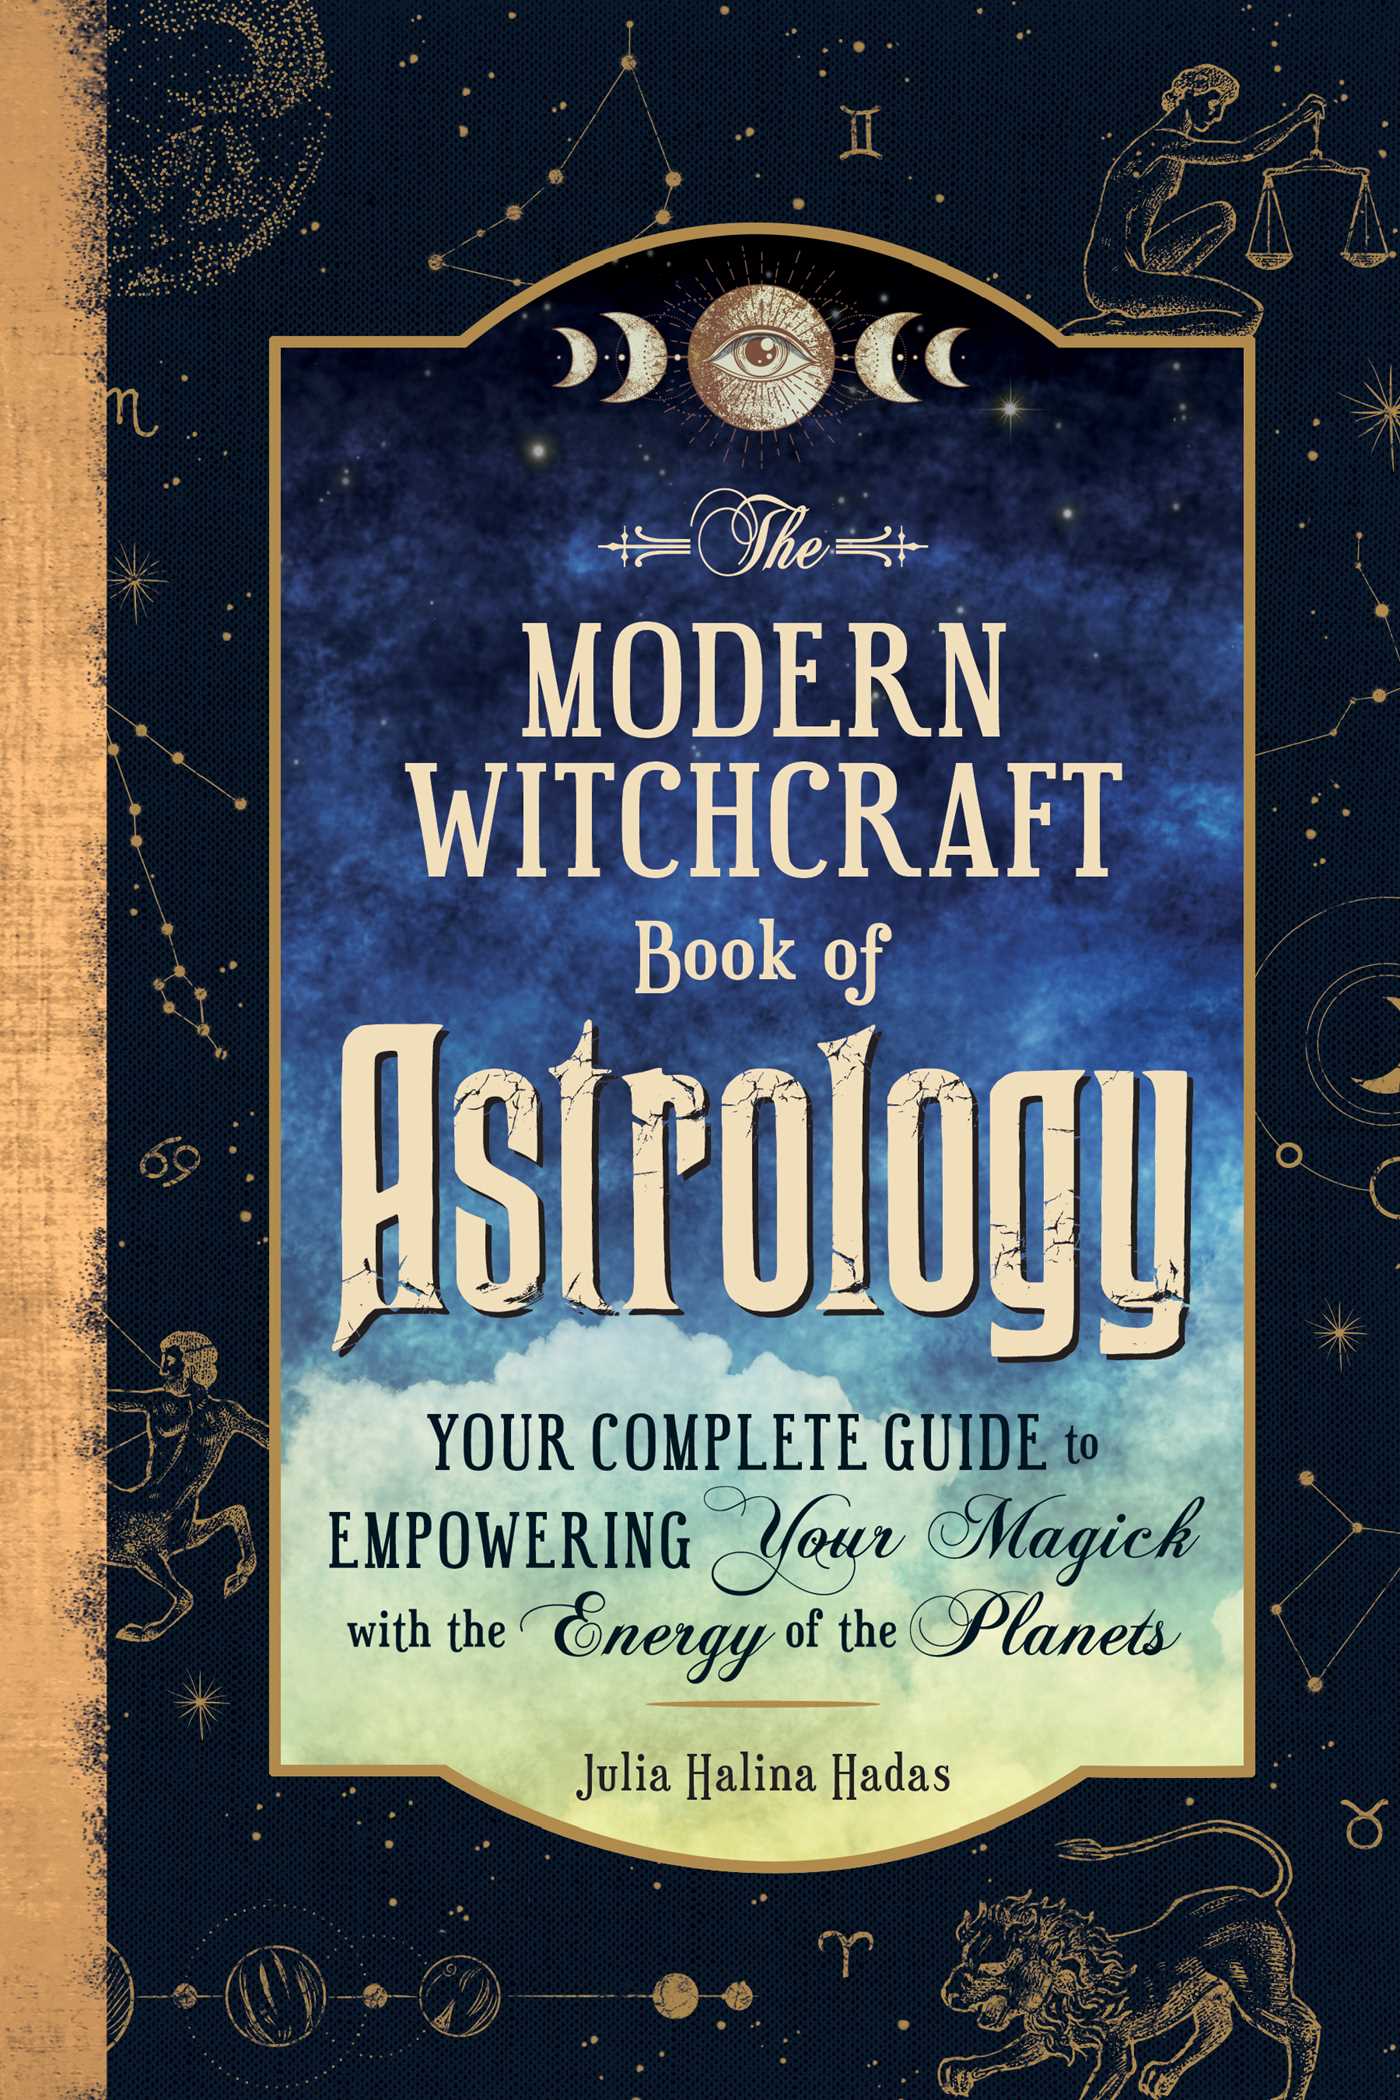 The Modern Witchcraft Book of Astrology : Your Complete Guide to Empowering Your Magick with the Energy of the Planets | Halina Hadas, Julia (Auteur)